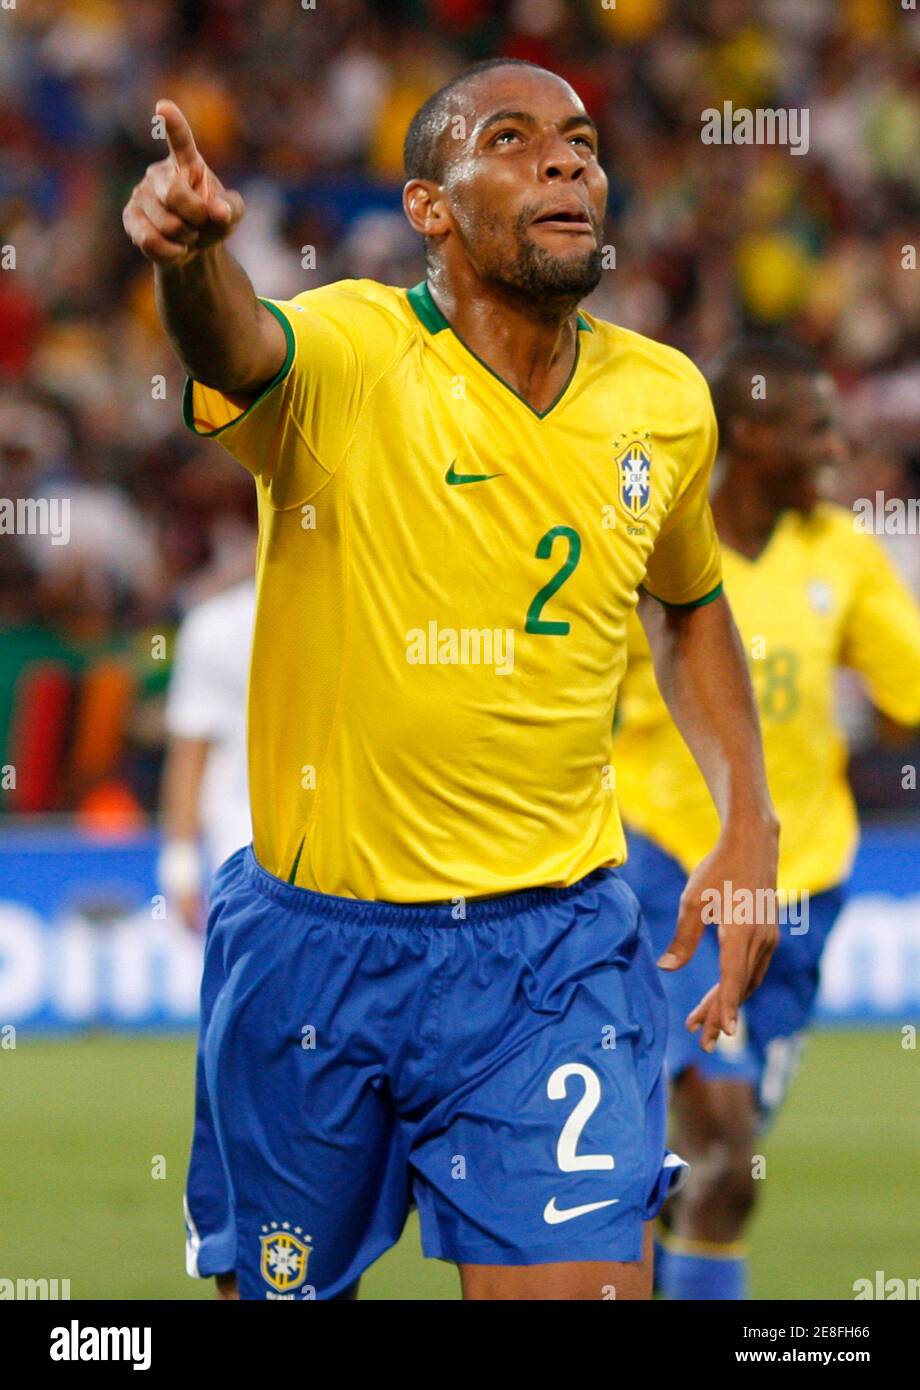 Brazil's Maicon celebrates after scoring during their Confederations Cup soccer match against the U.S at the Loftus Versfeld Stadium in Pretoria June 18, 2009.       REUTERS/Jerry Lampen (SOUTH AFRICA SPORT SOCCER) Stock Photo